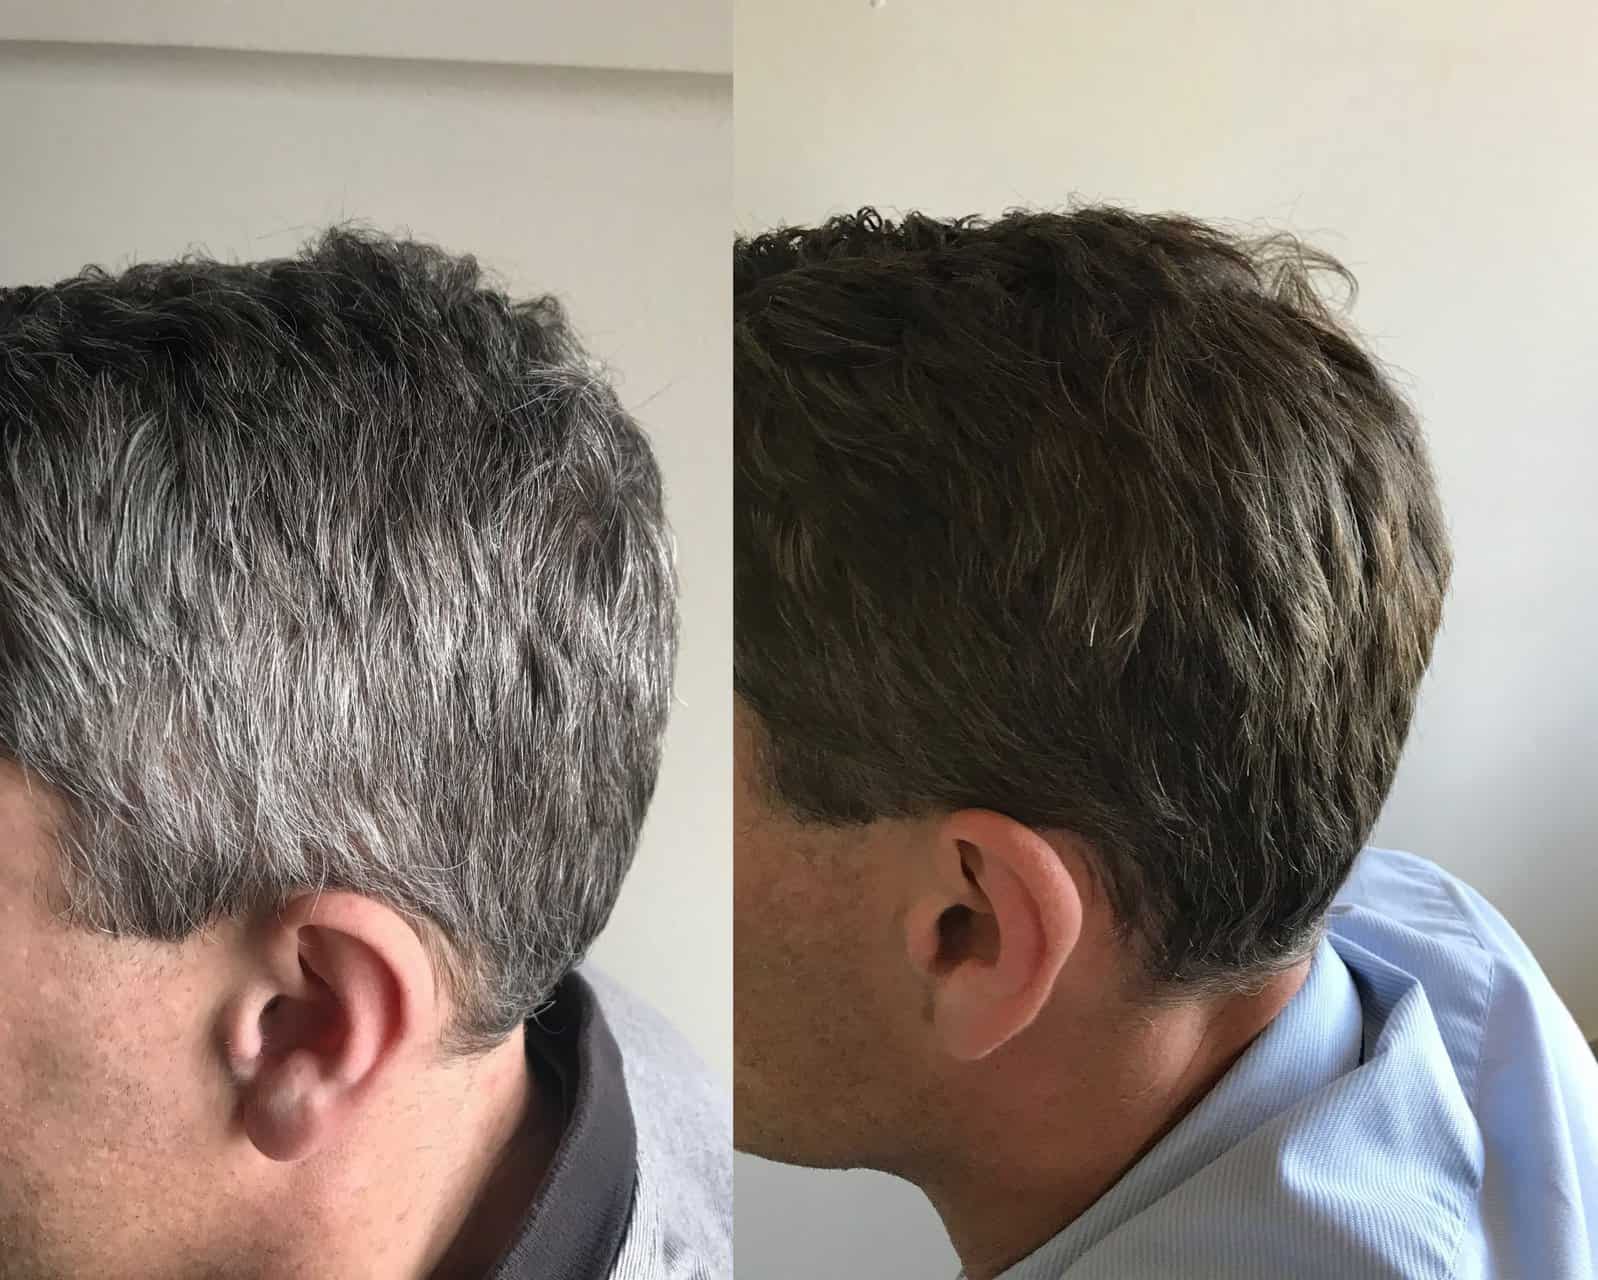 Grey hair at a young age – what to do? GR-7 Professional is the answer!